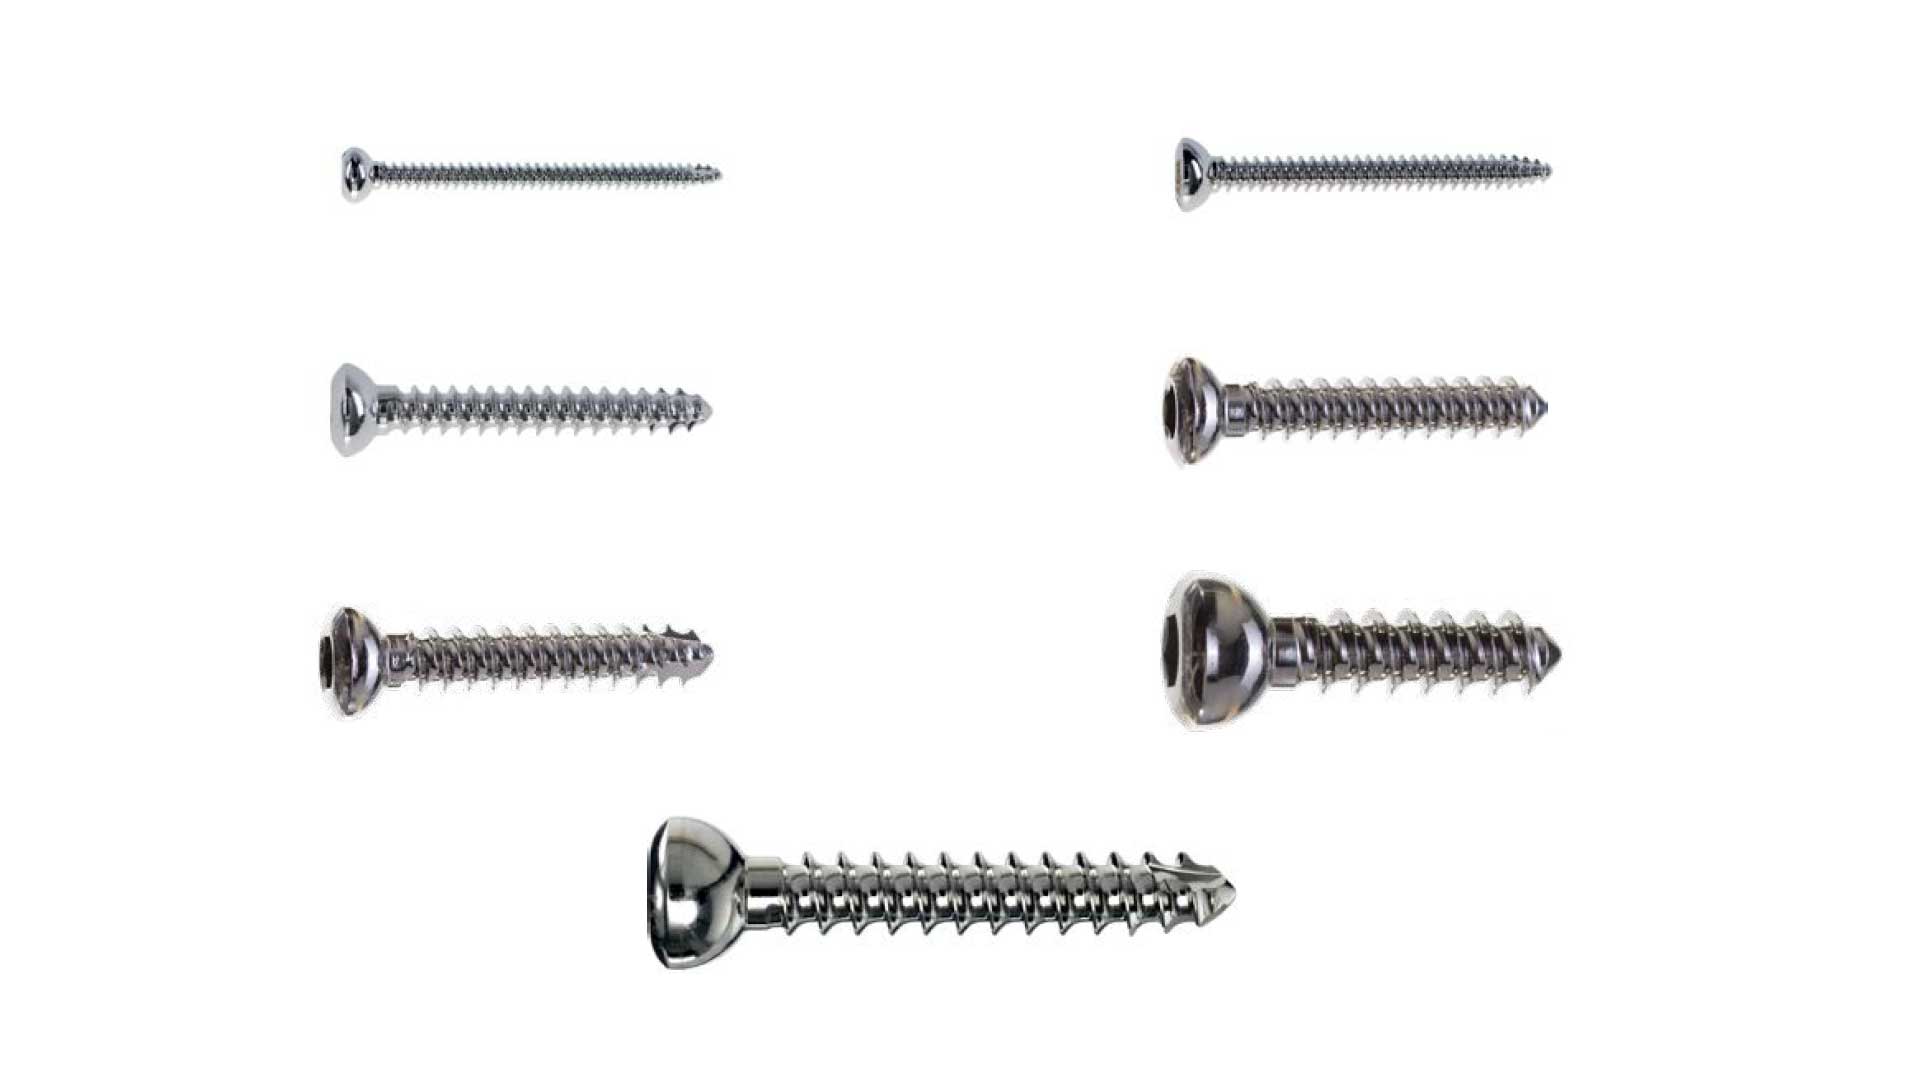 Königsee Implantate Products: Cortical screw Standard; stainless steel, category Screws